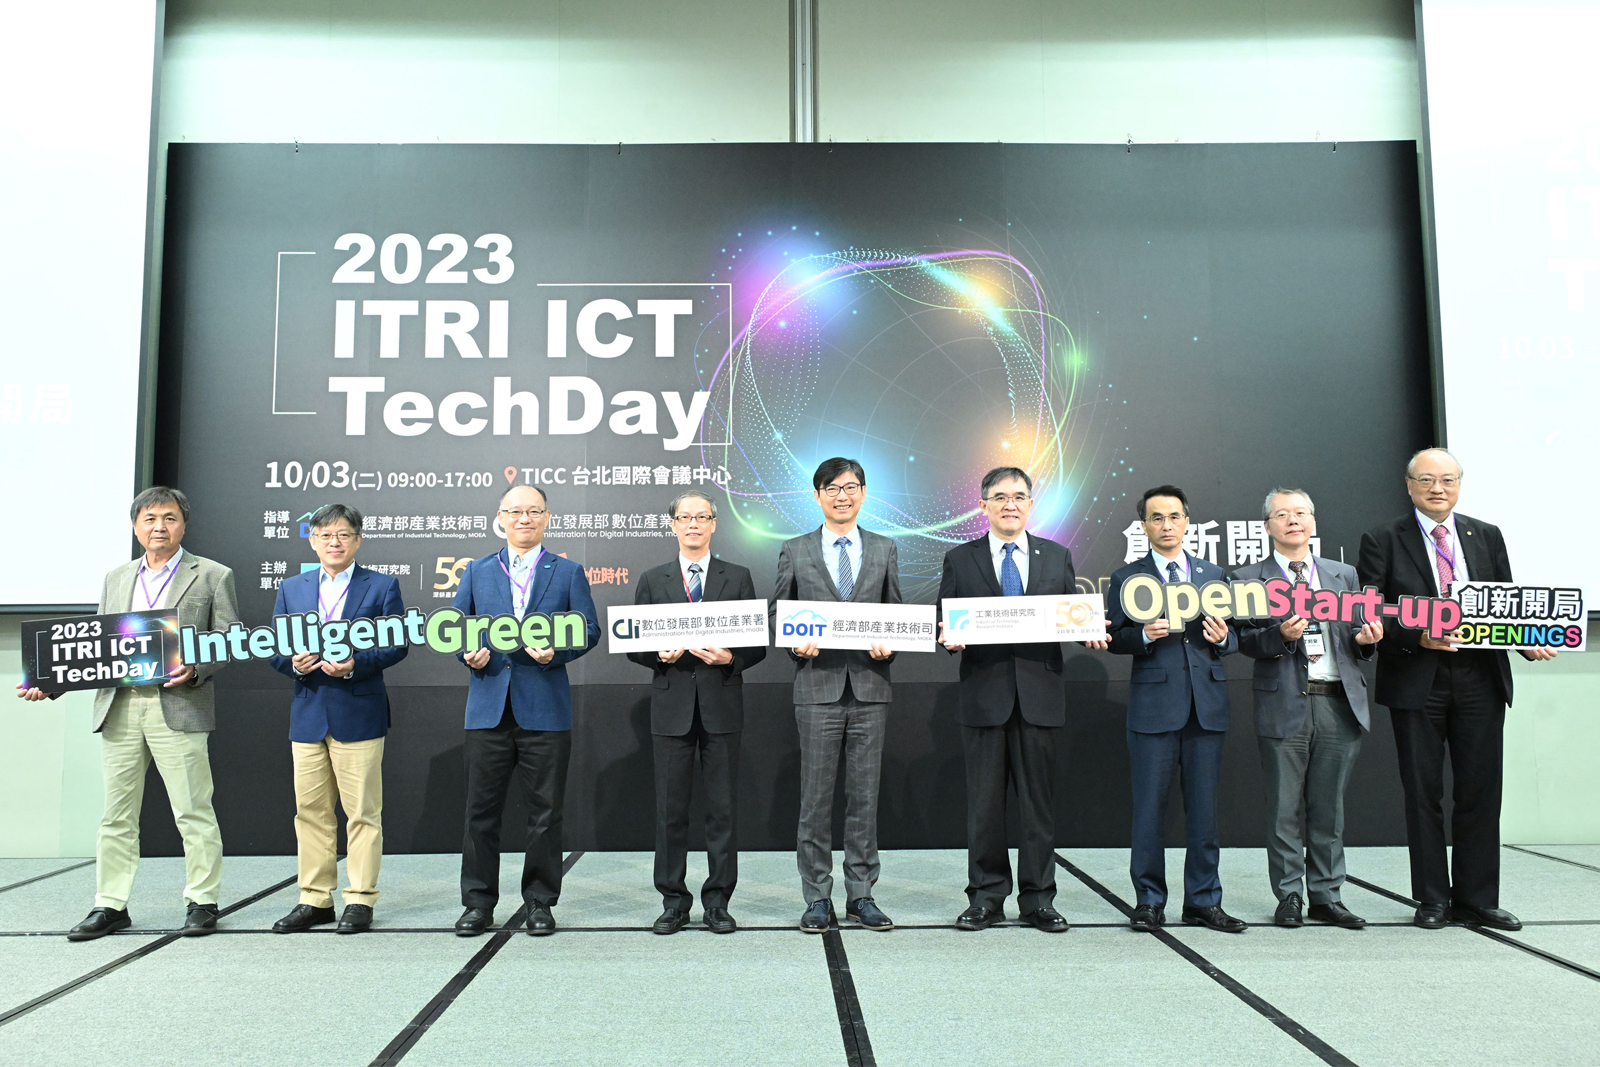 The 2023 ICT TechDay is graced by representatives from the Taiwan Association of Information and Communication Standards (TAICS), the TWISC, NTT, ADI and DOIT at the Ministry of Economic Affairs (MOEA), ITRI, the Taiwan Space Agency (TASA), and the Cloud Computing and IoT Association in Taiwan (CIAT).